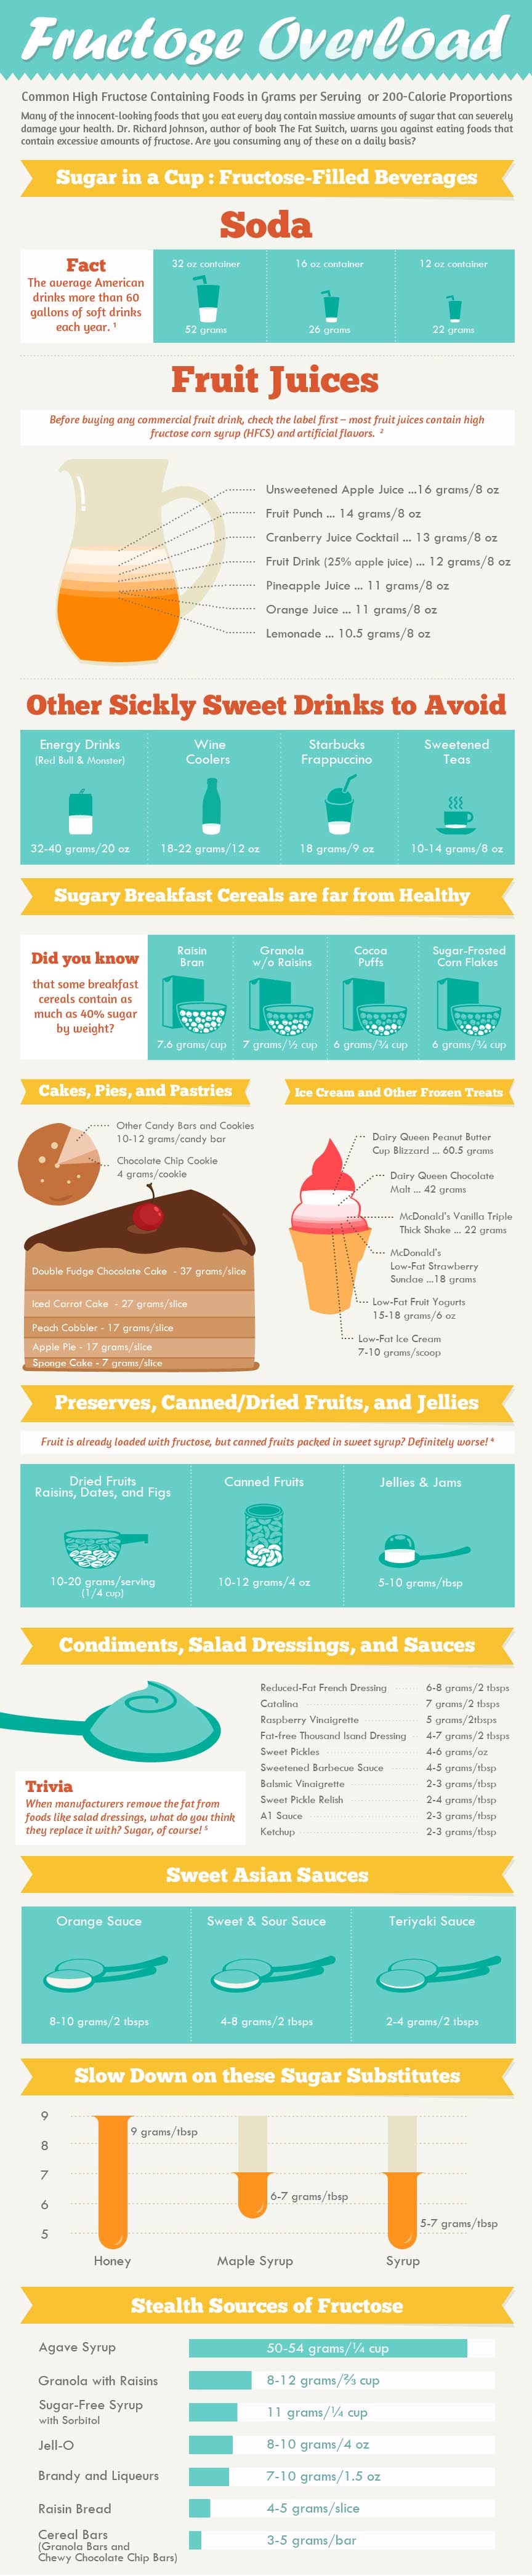 fructose-overload-infographic